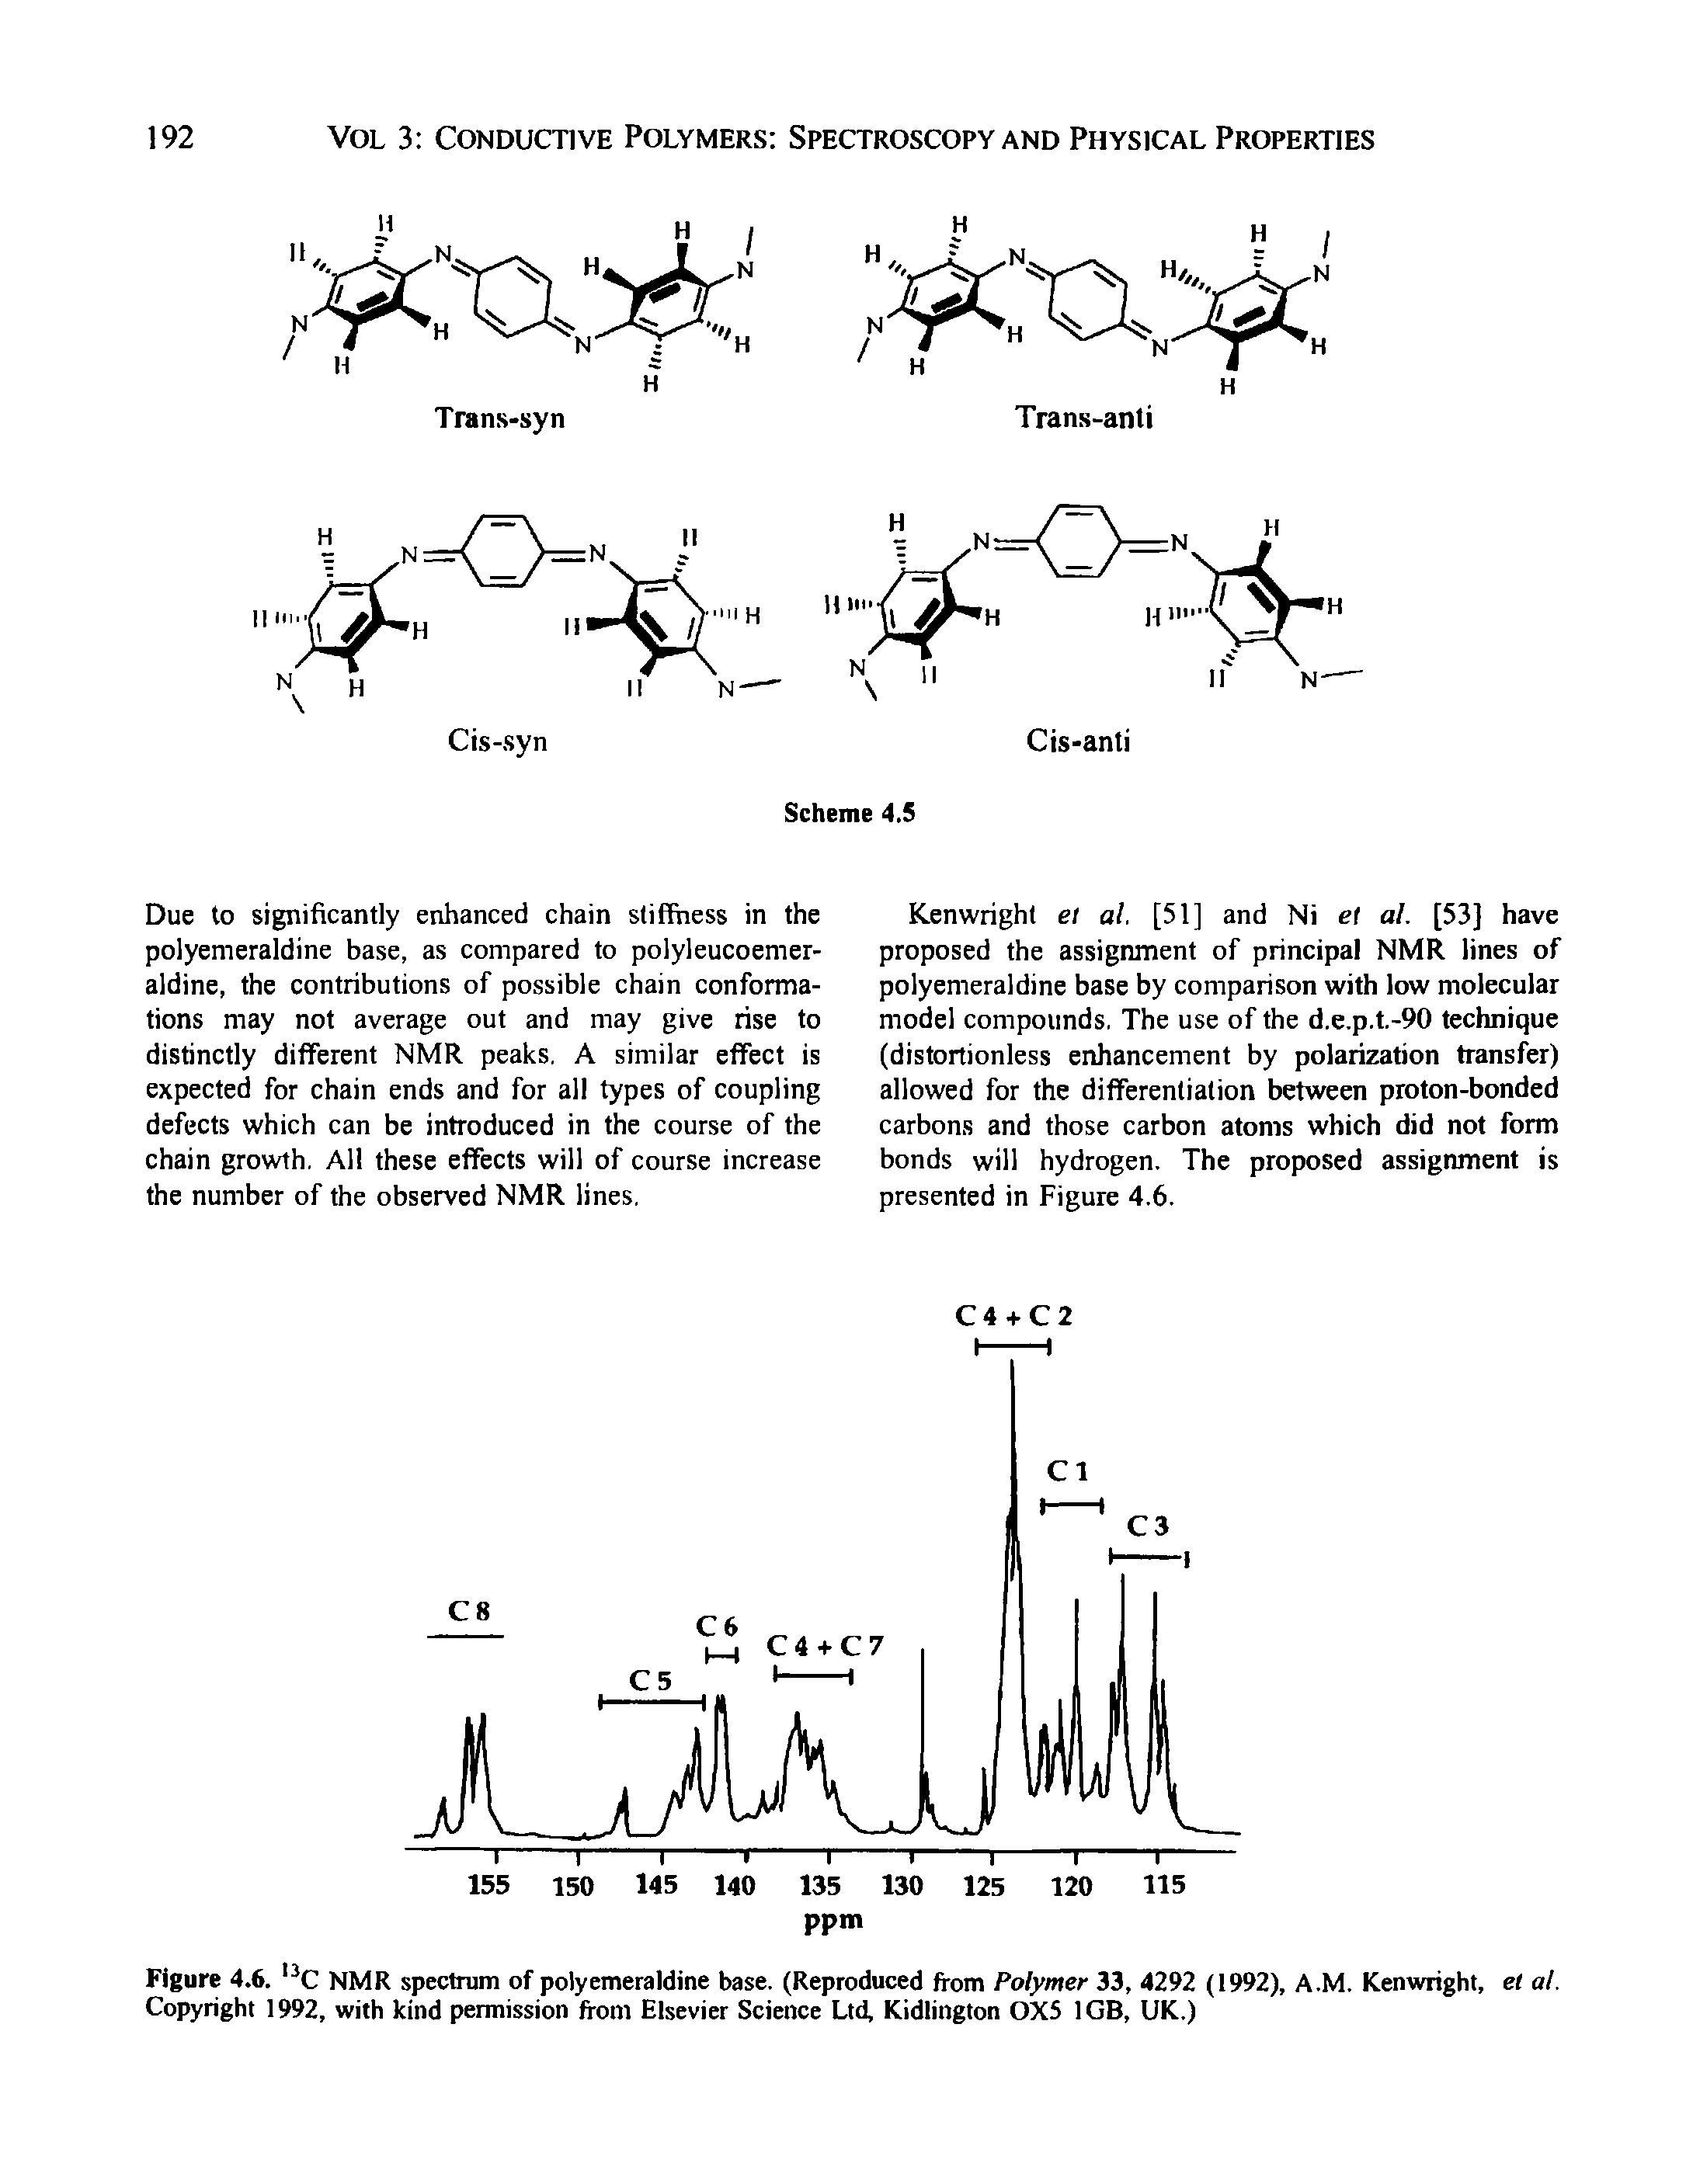 Figure 4.6. C NMR spectrum of polyemeraldine base. (Reproduced from Polymer 33, 4292 (1992), A.M. Kenwright, et al. Copyright 1992, with kind permission from Elsevier Science Ltd, Kidlington 0X5 1GB, UK.)...